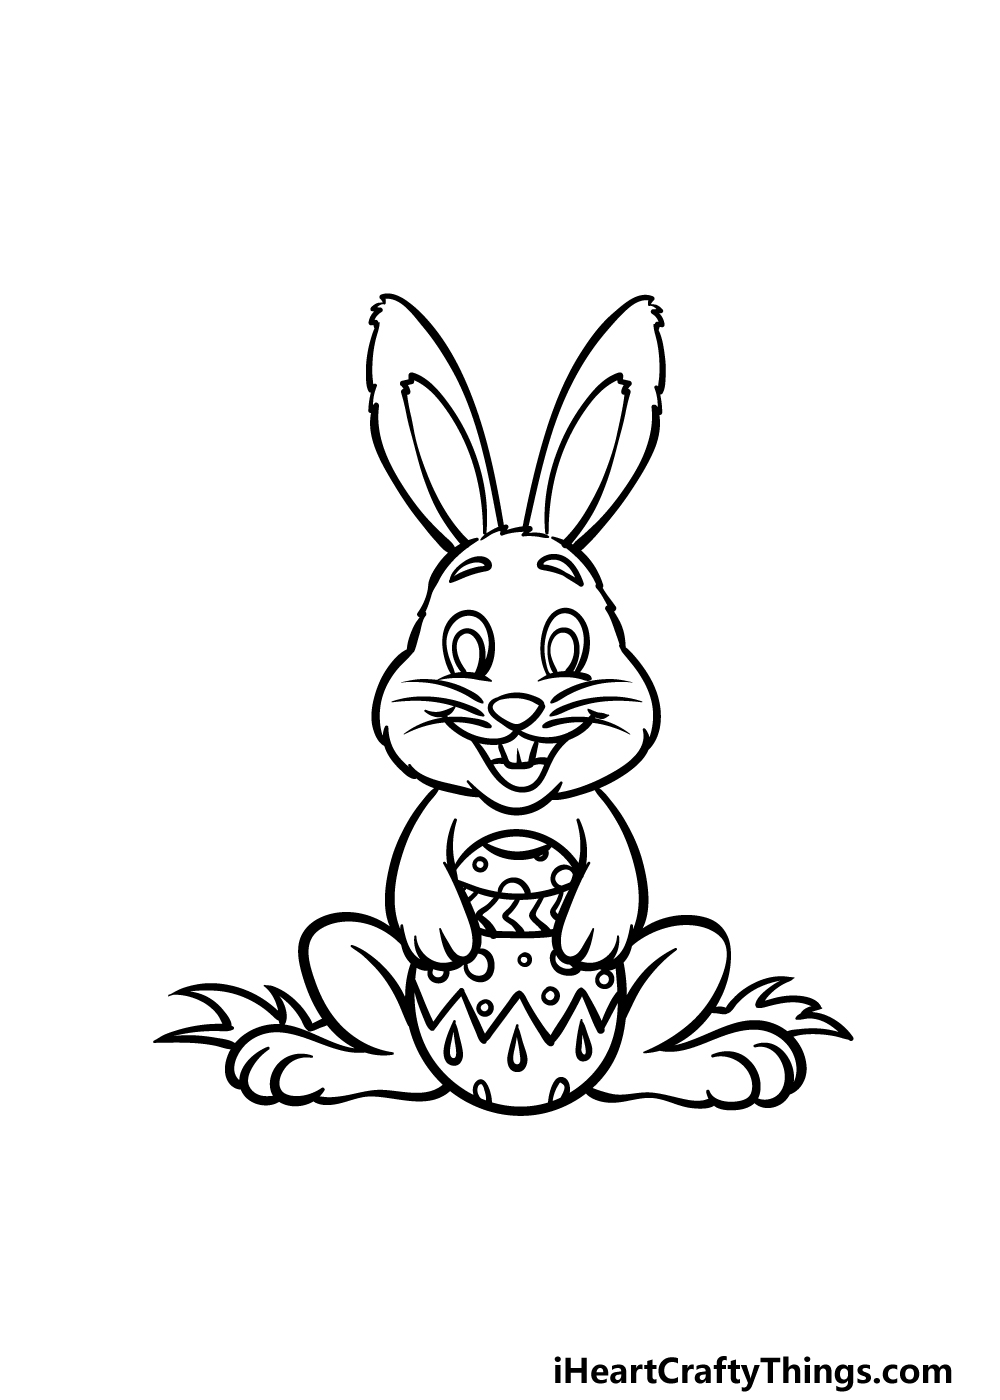 How to draw easter bunnies